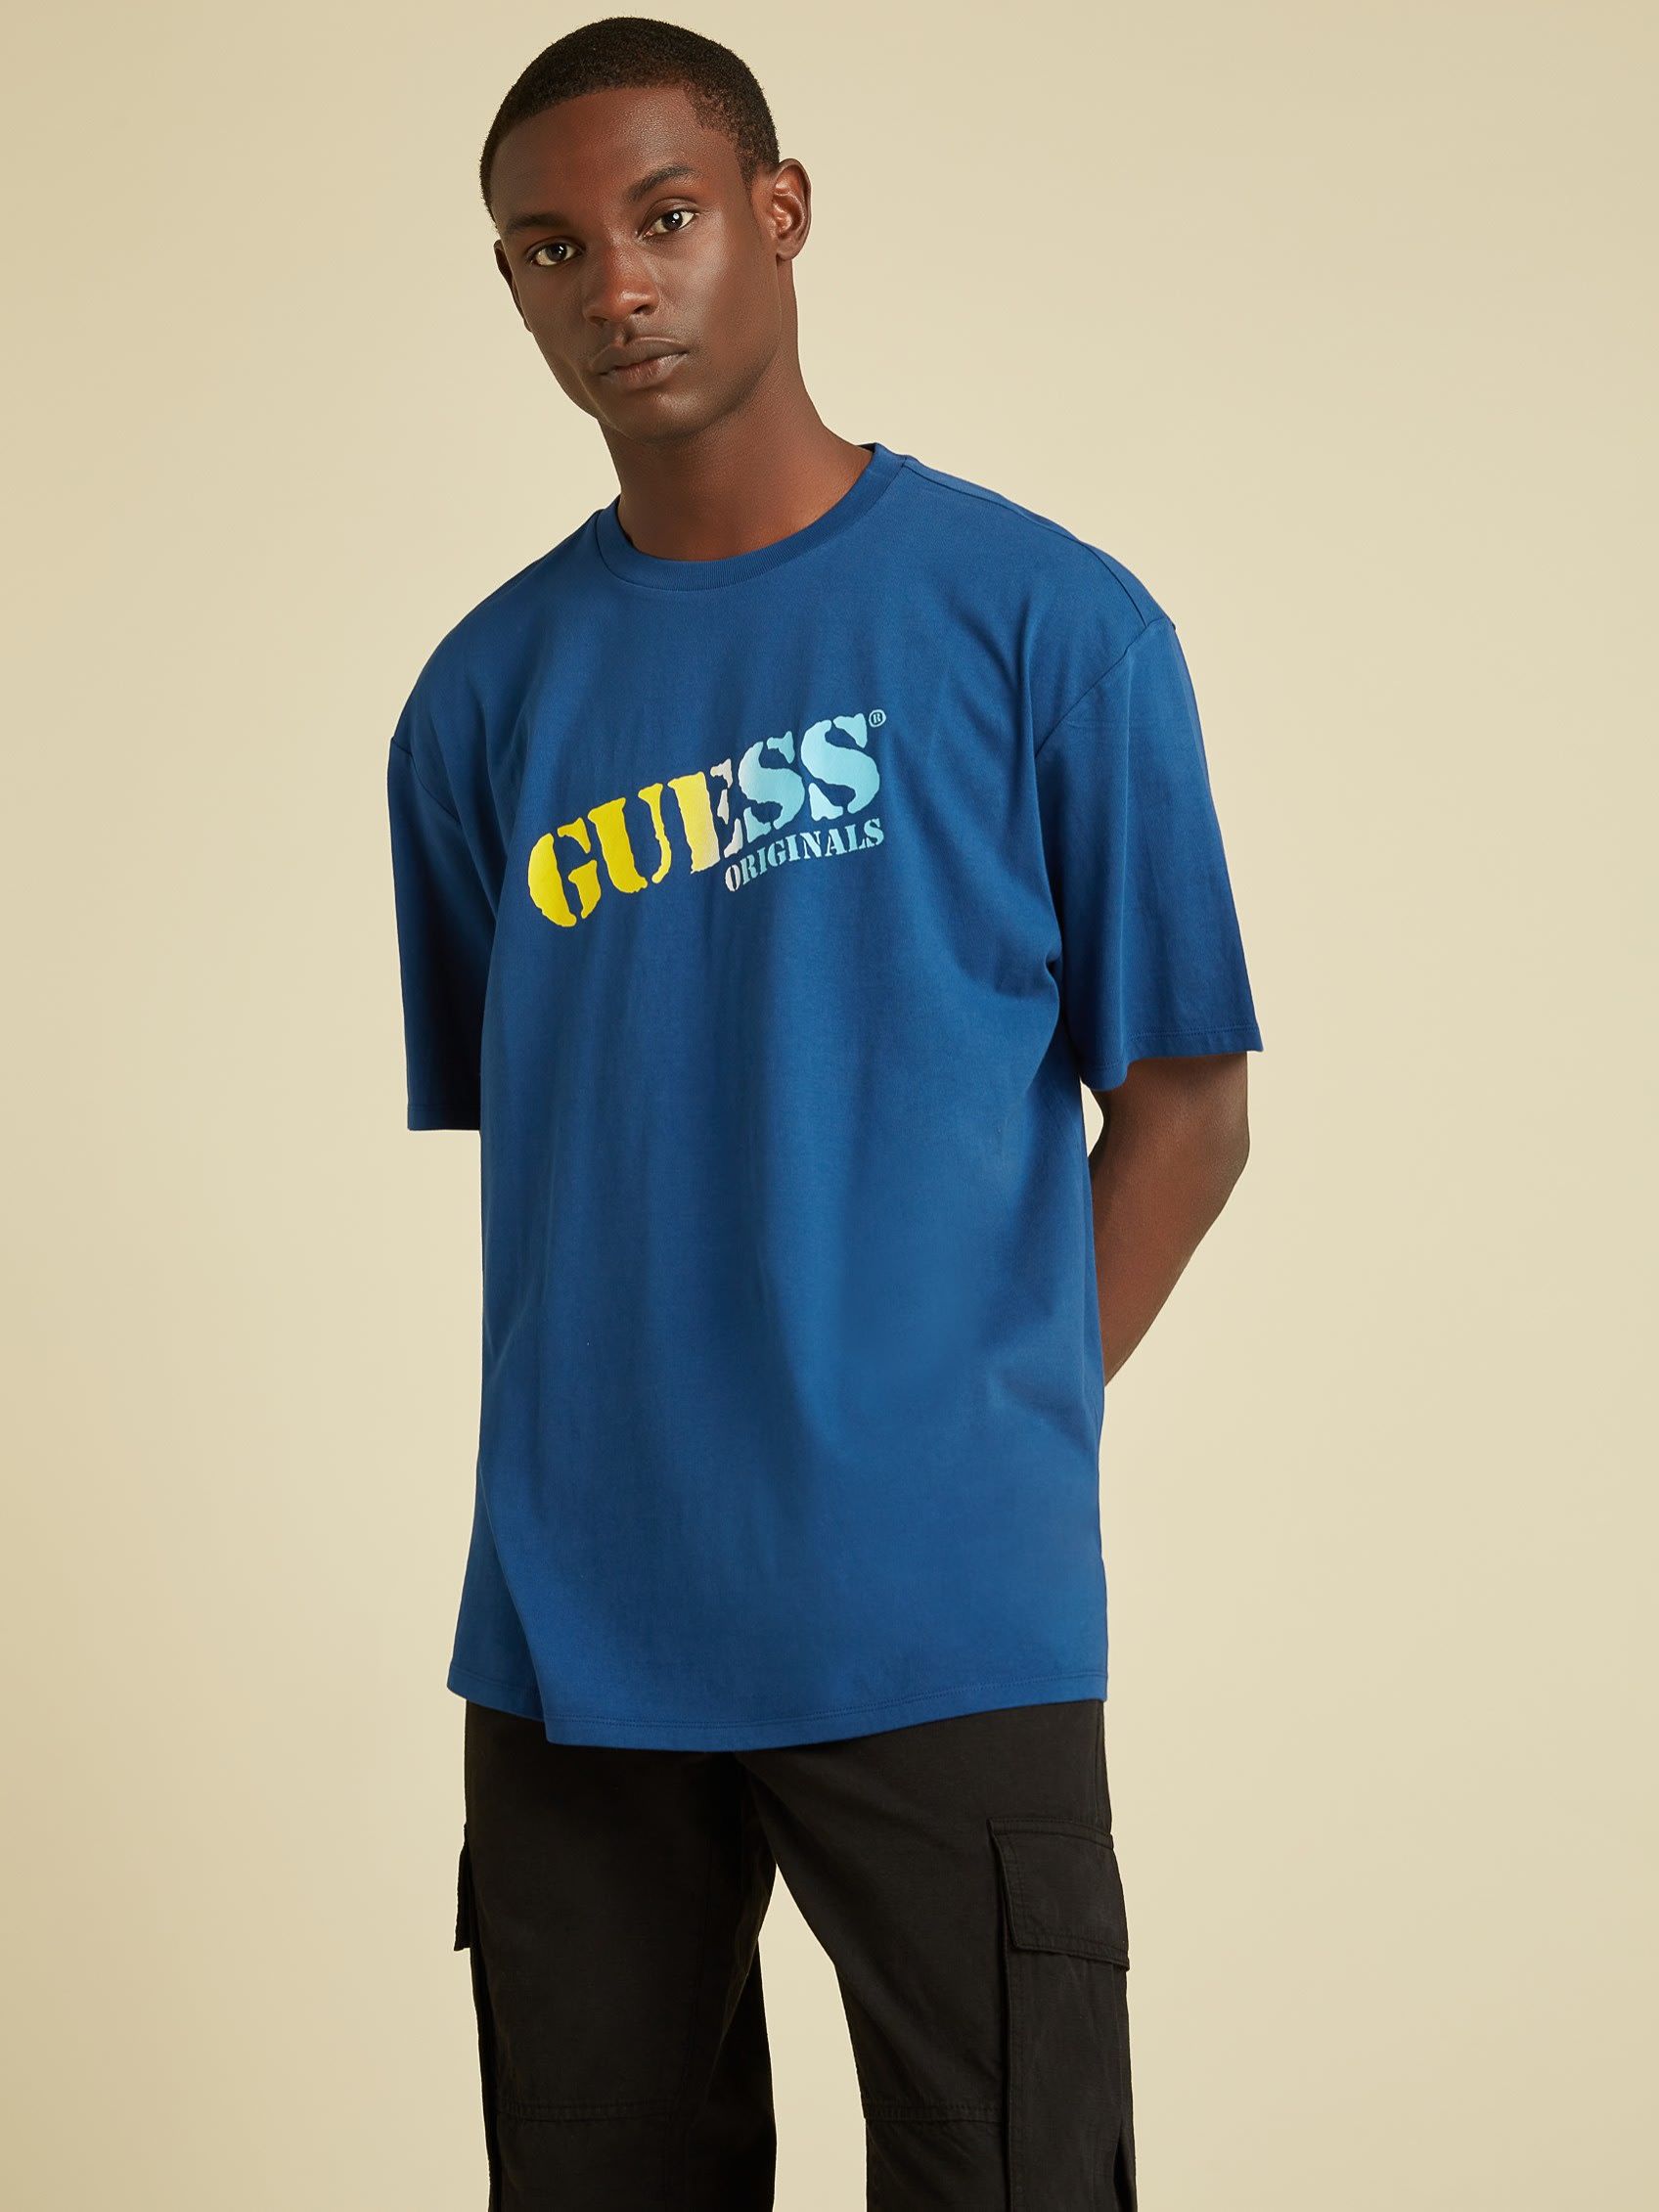 GUESS Originals TIM OMBRE LOGO TEE | Guess Philippines